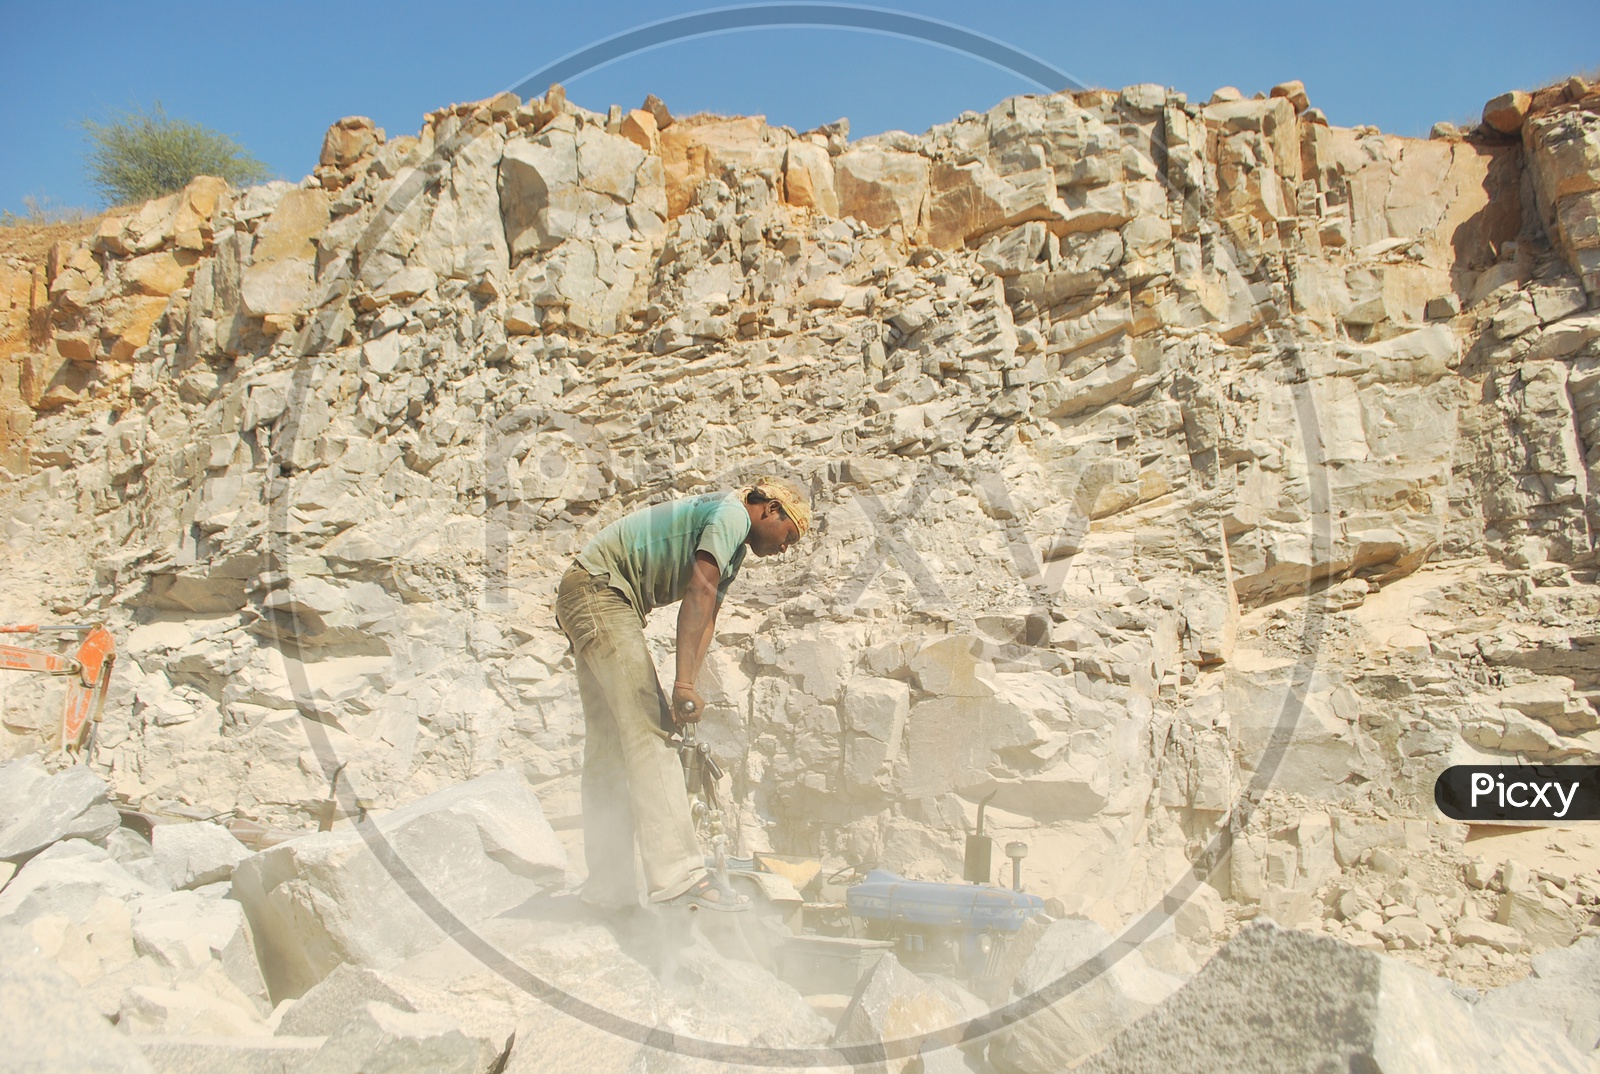 Drilling Worker Working at Rock or Stone Quarry